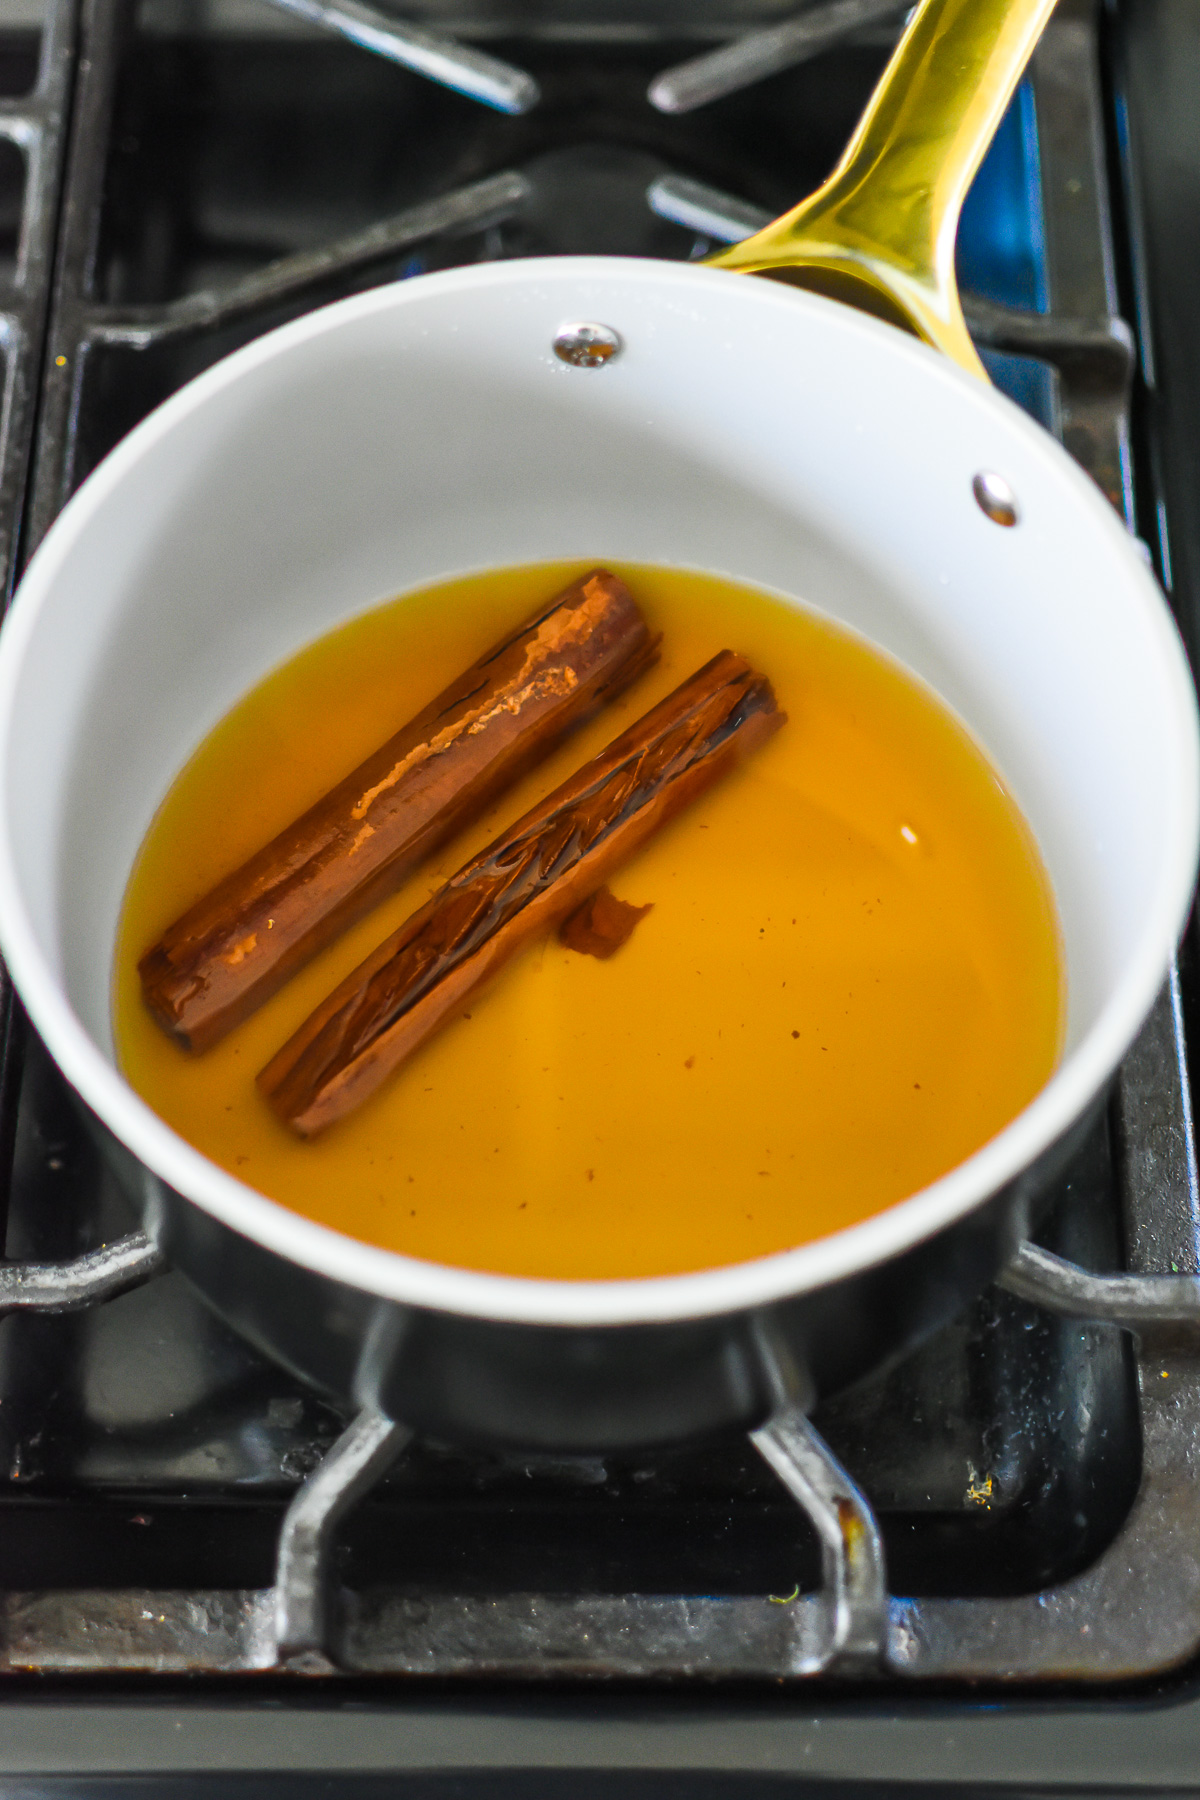 two cinnamon sticks steeping in boiled water on stove top.